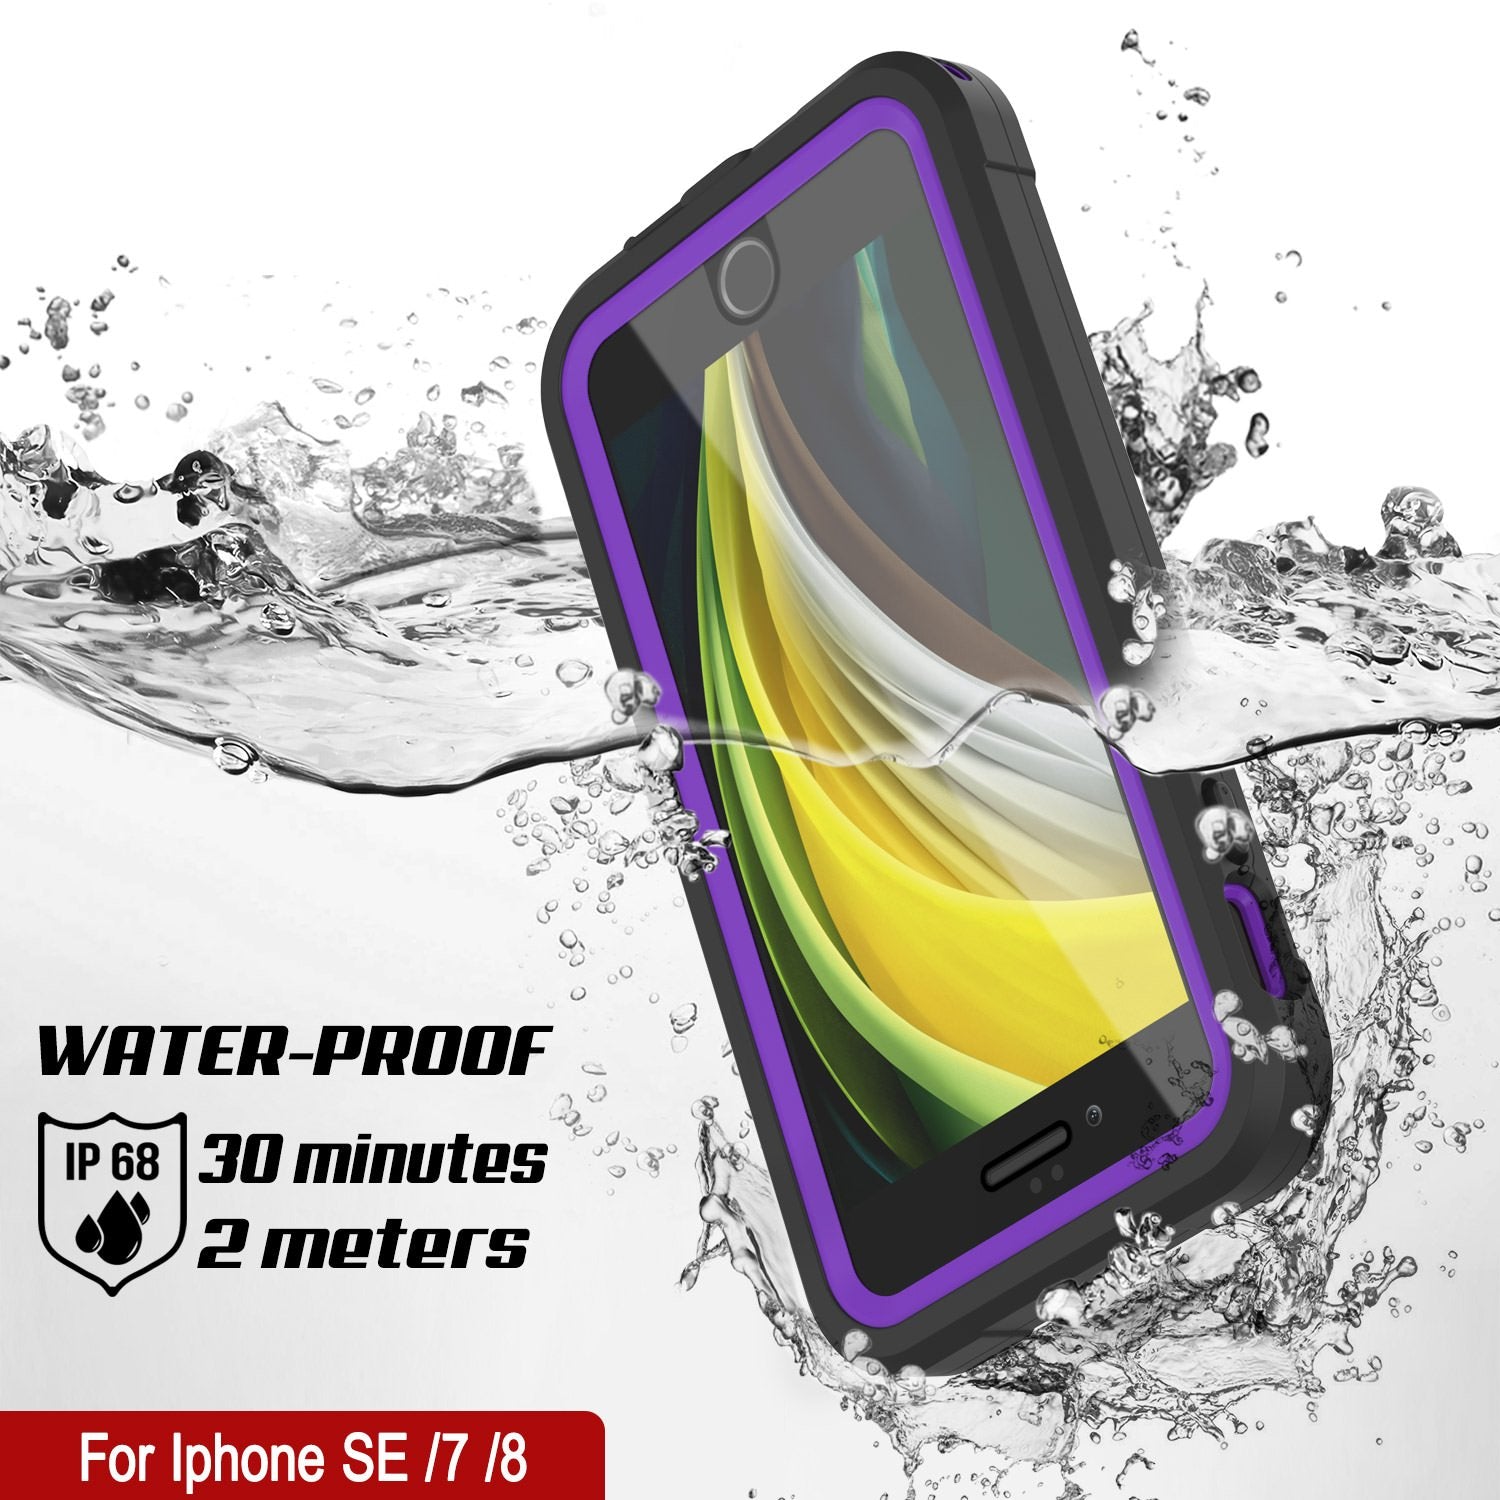 iPhone 7 Waterproof IP68 Case, Punkcase [Purple]  [Maximus Series] [Slim Fit] [IP68 Certified] [Shockresistant] Clear Armor Cover with Screen Protector | Ultimate Protection